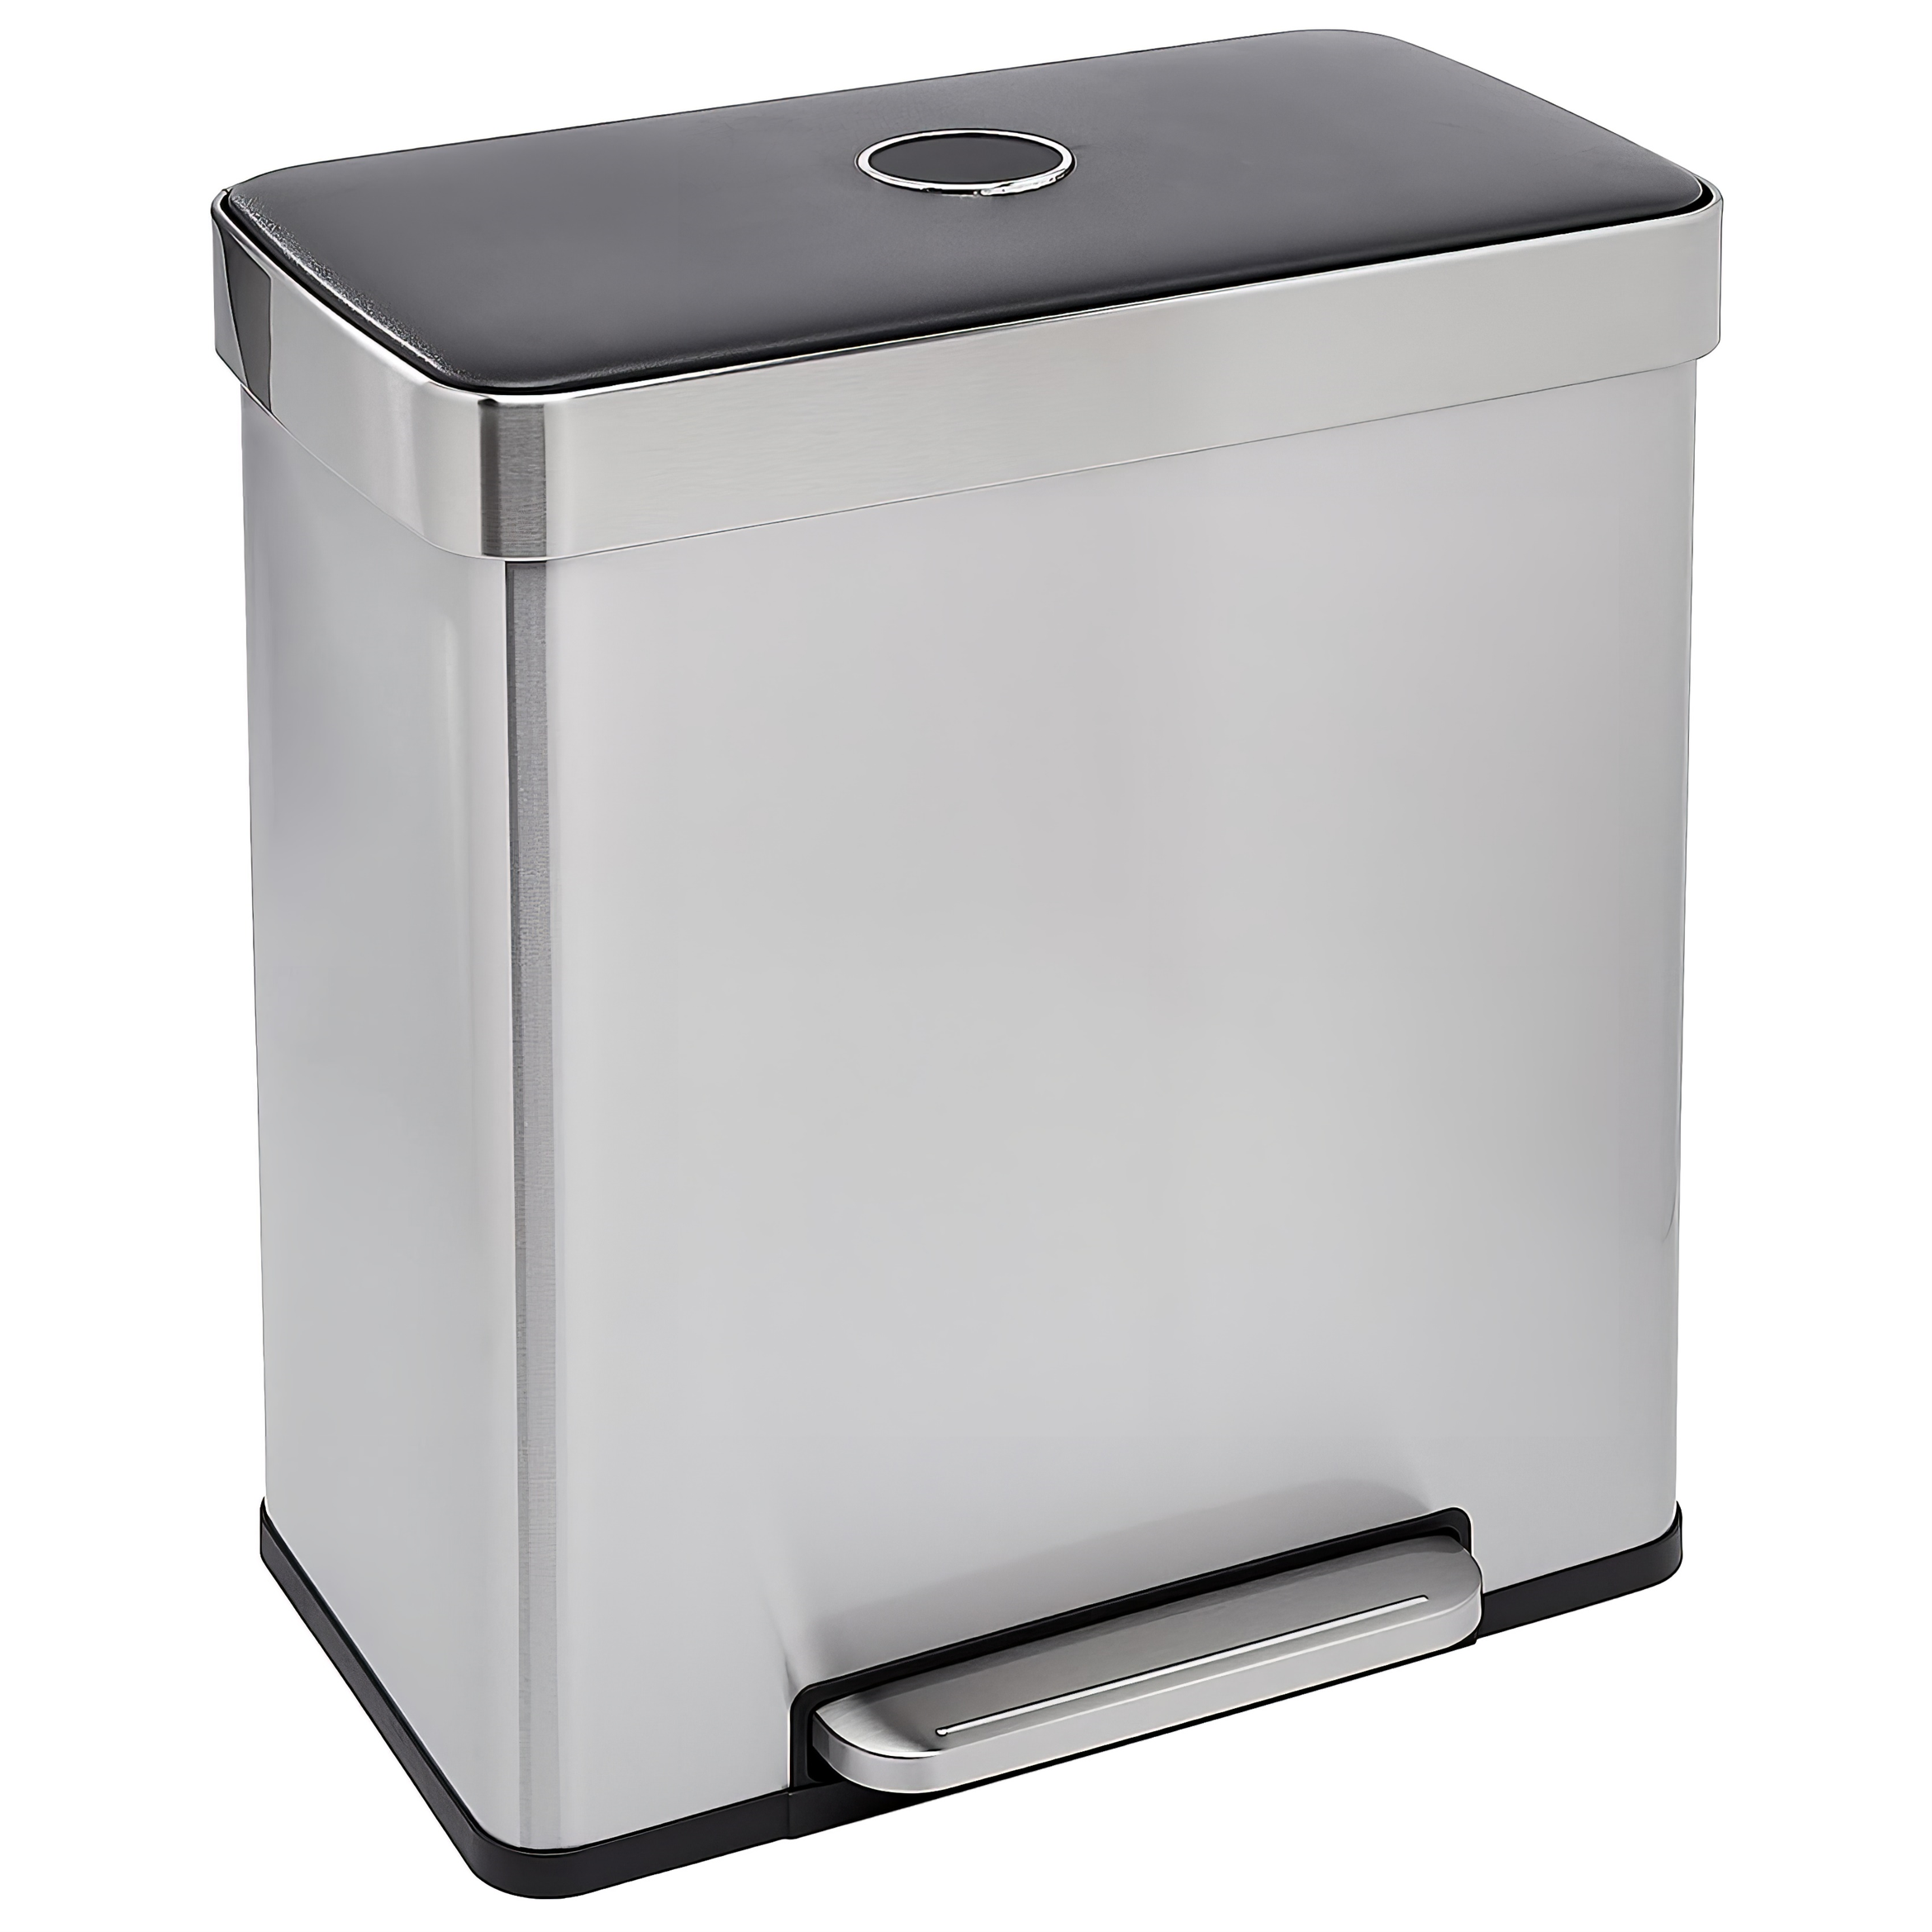 PRE ORDER MAY – Stainless Steel 2 Compartment Pedal Bin – 2 x 30L